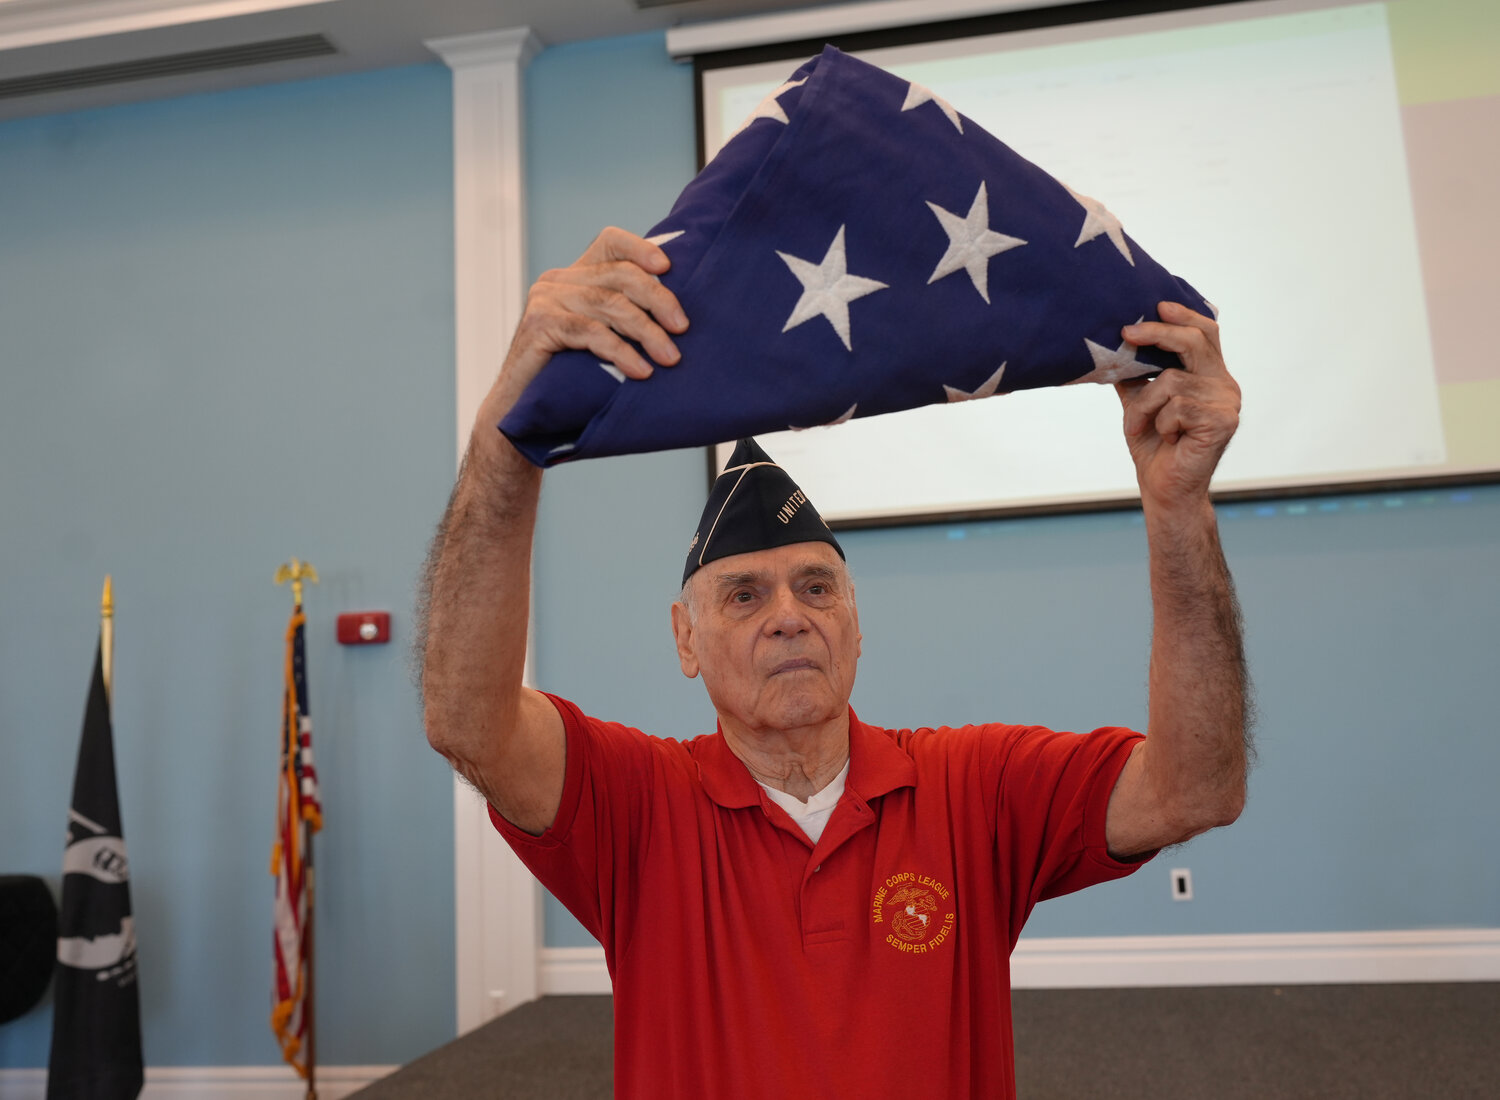 US Marine Corps veteran Len Goldstein shows how to properly fold the American flag.